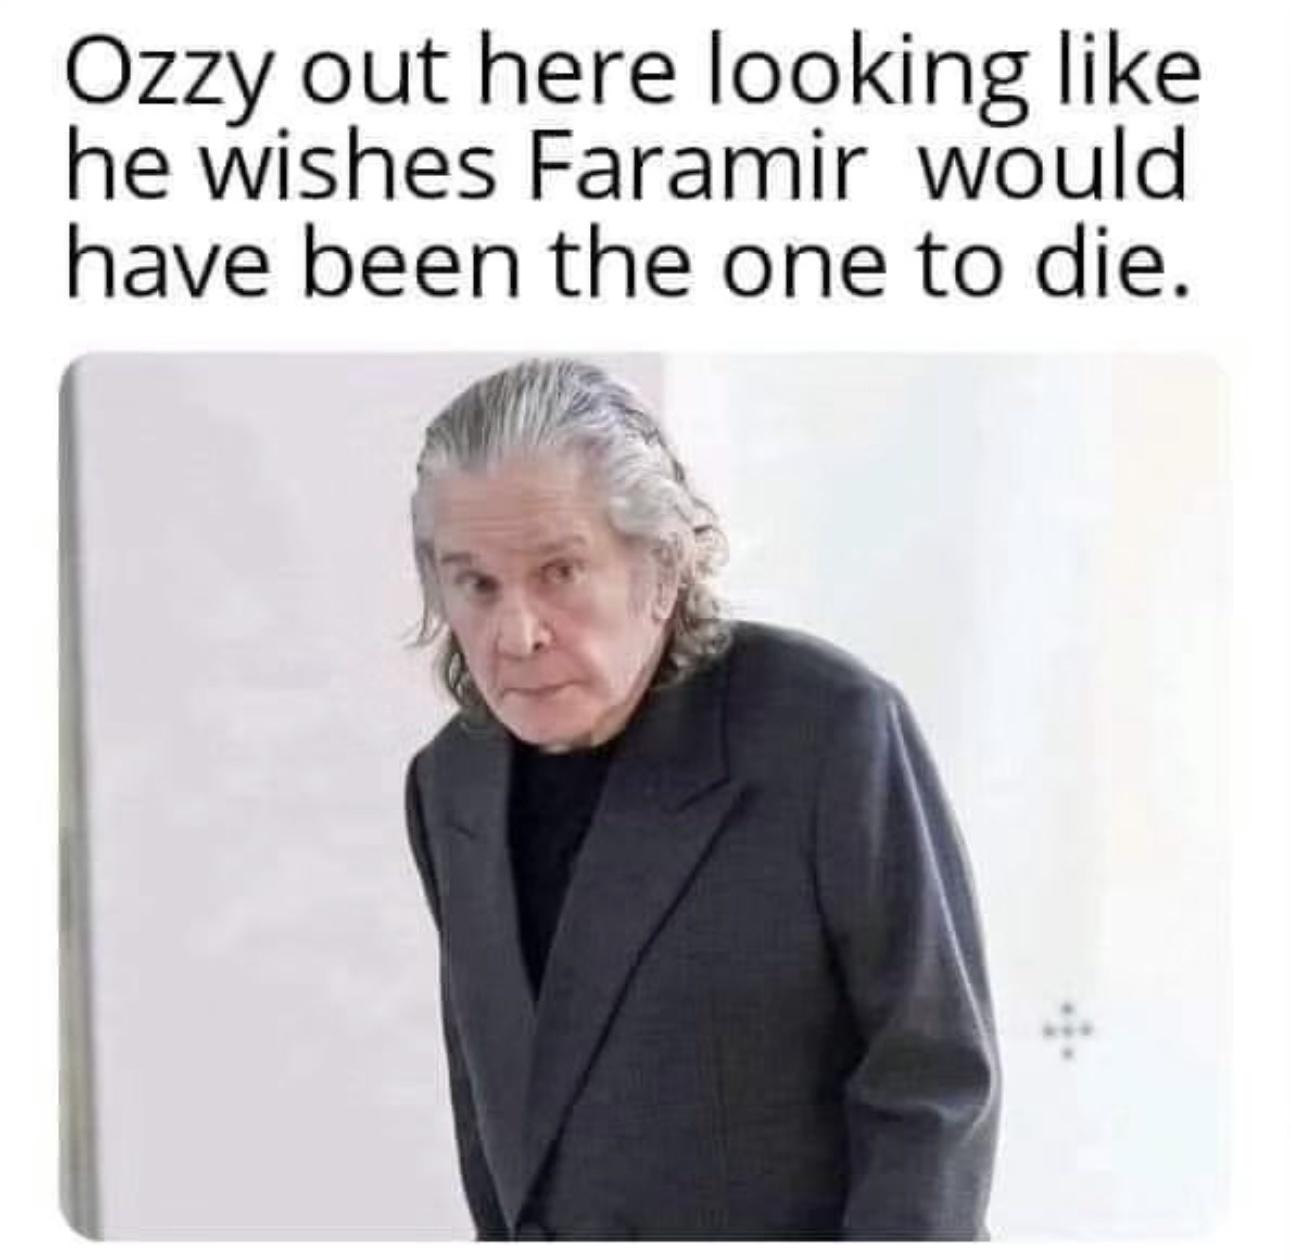 funny memes - android 2.3 gingerbread - Ozzy out here looking he wishes Faramir would have been the one to die.